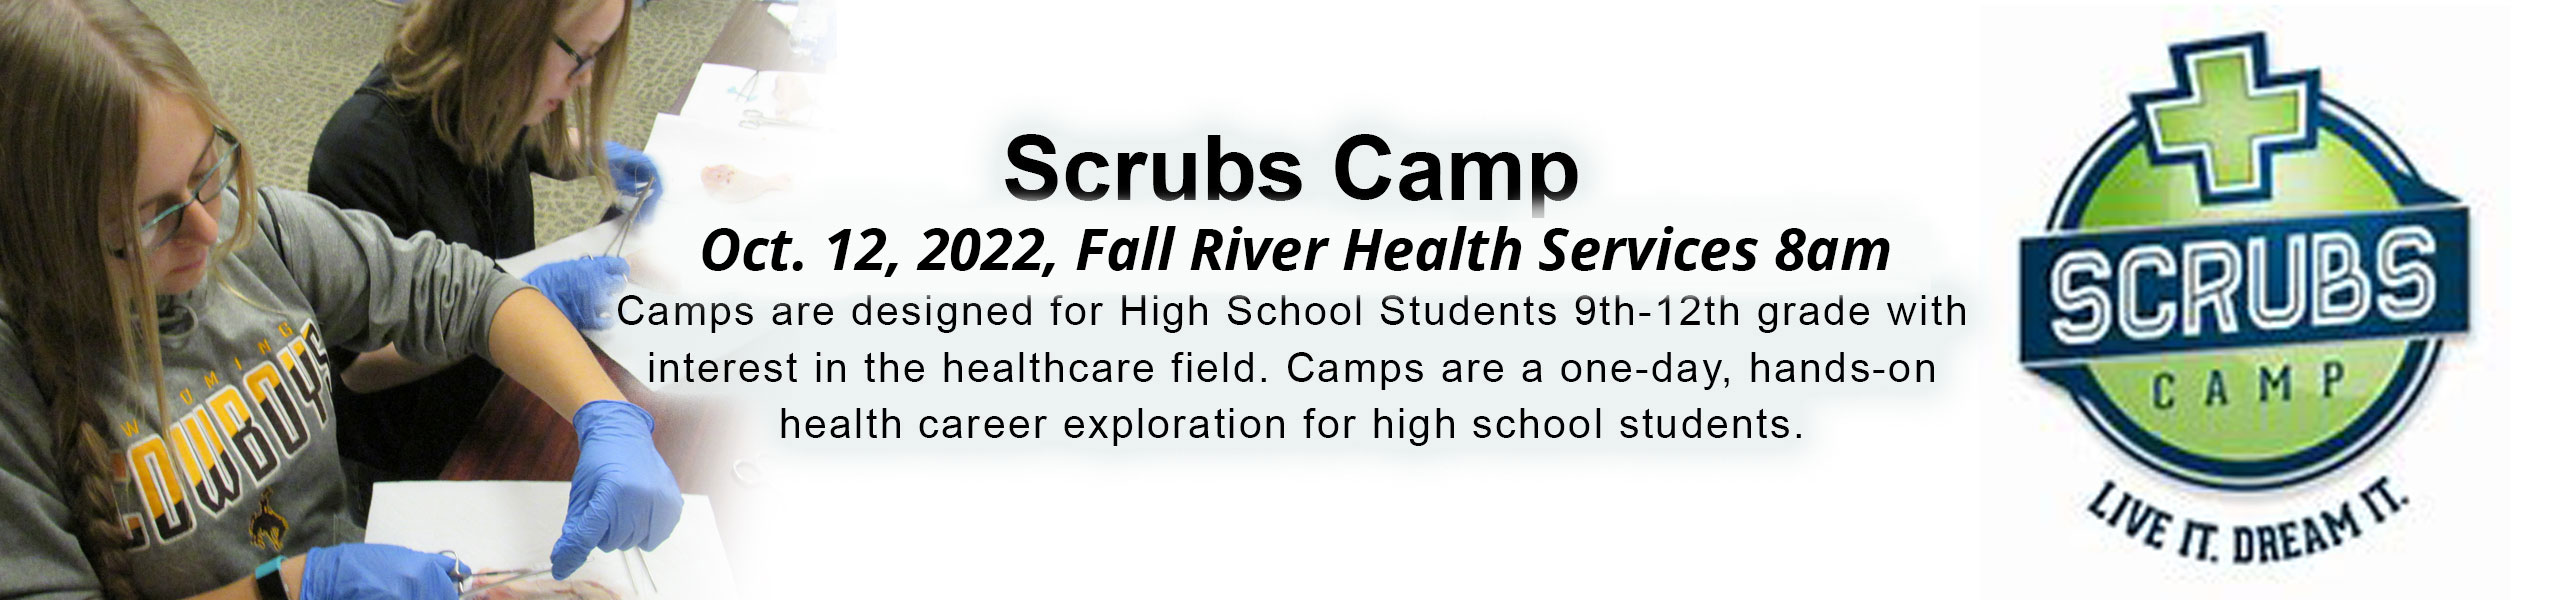 Banner picture on right hand side of two female High School Students at Scrubs Camp doing a hands-on activity wearing gloves and holding scissors
Banner picture on left hand side is a circle icon with a plus sign at the top of it and it says "SCRUBS CAMP" "LIVE IT. DREAM IT."